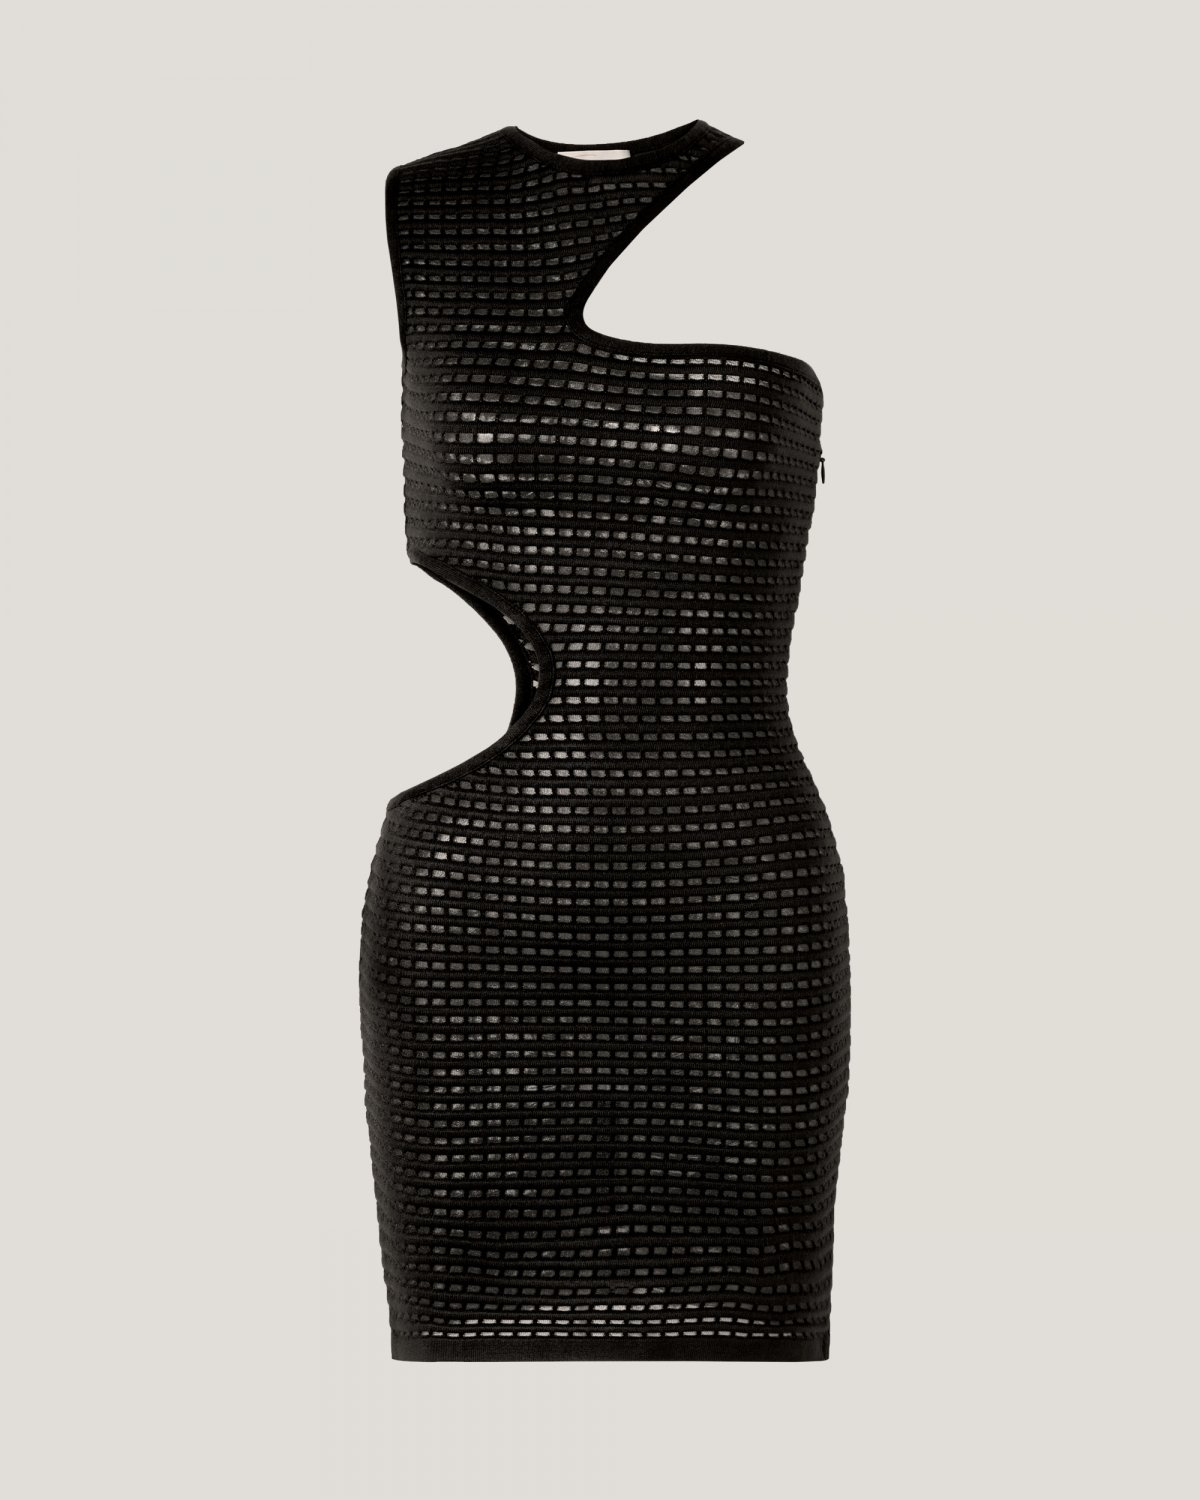 Asymmetrical black iconic dress | Spring Summer 2023 Collection, 73_74, Cruise 2023 Collection, Mid season sale -30%, Summer Sale | Genny